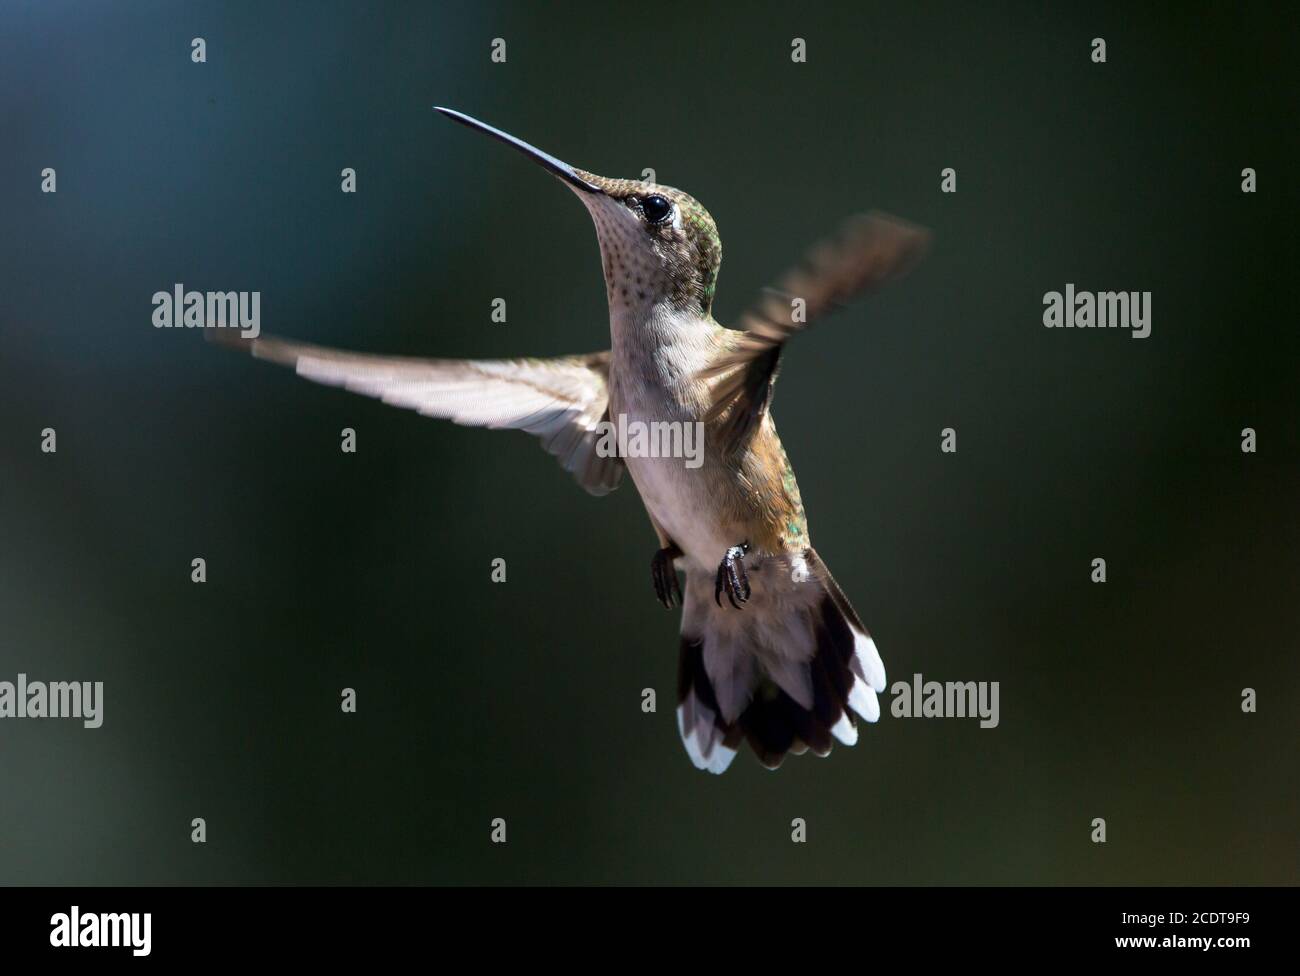 A female ruby-throated hummingbird hovering against a dark background. Stock Photo